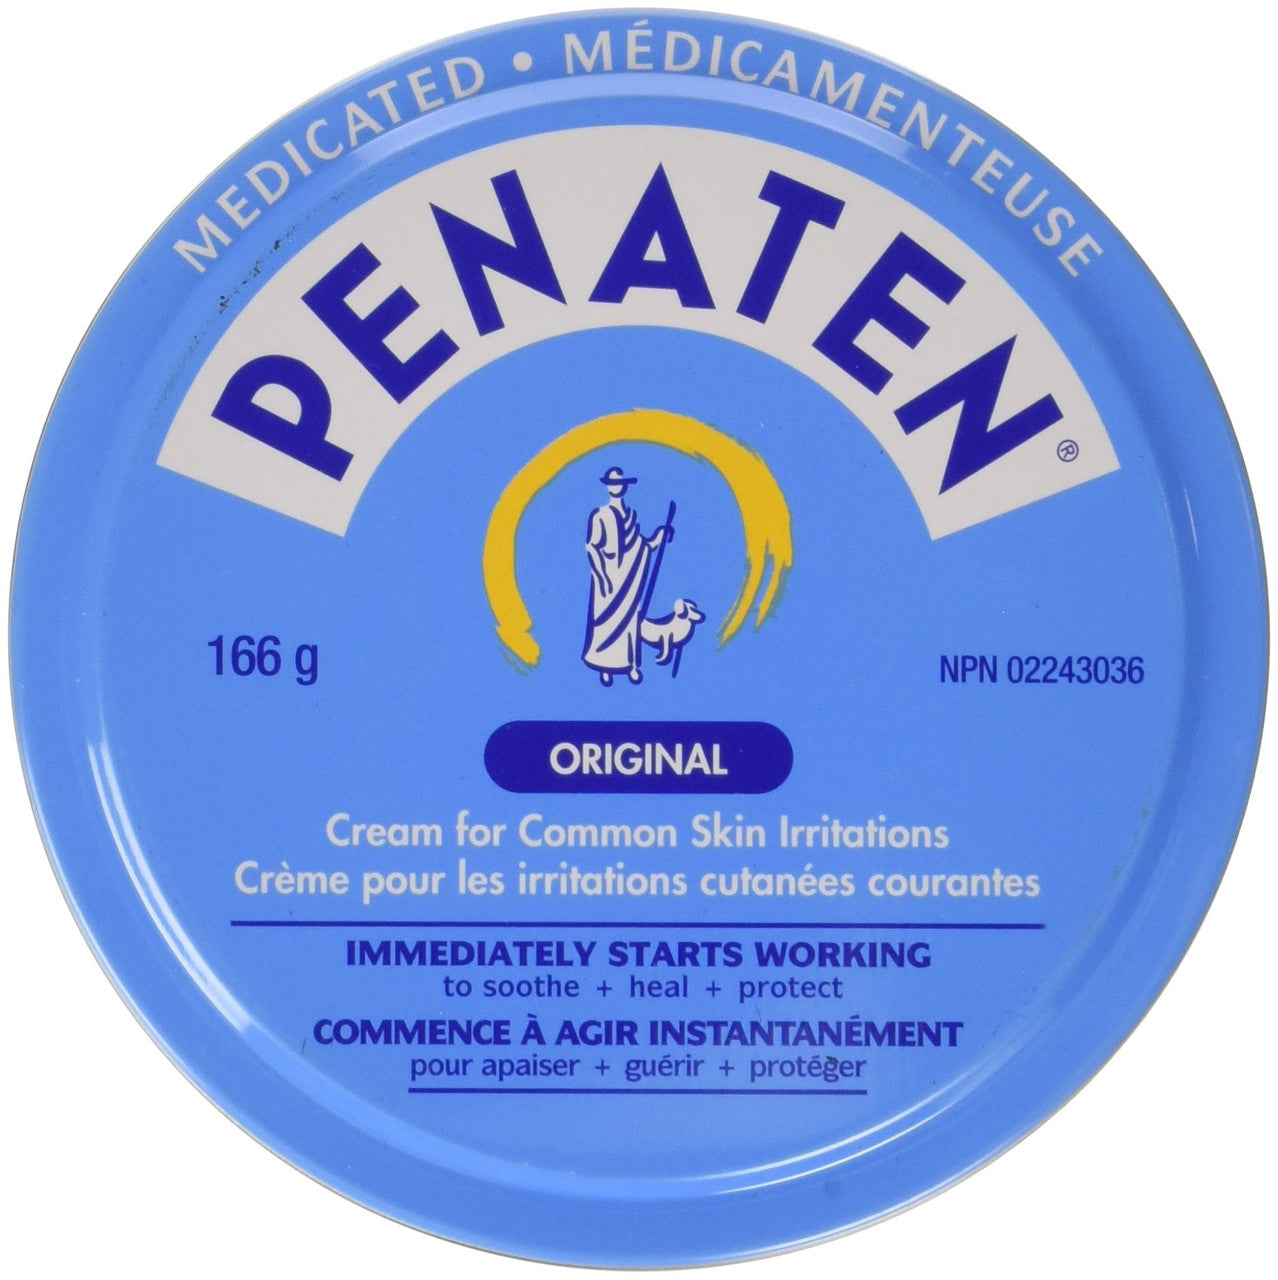 Penaten Medicated Cream, 166g/5.9 oz., {Imported from Canada}